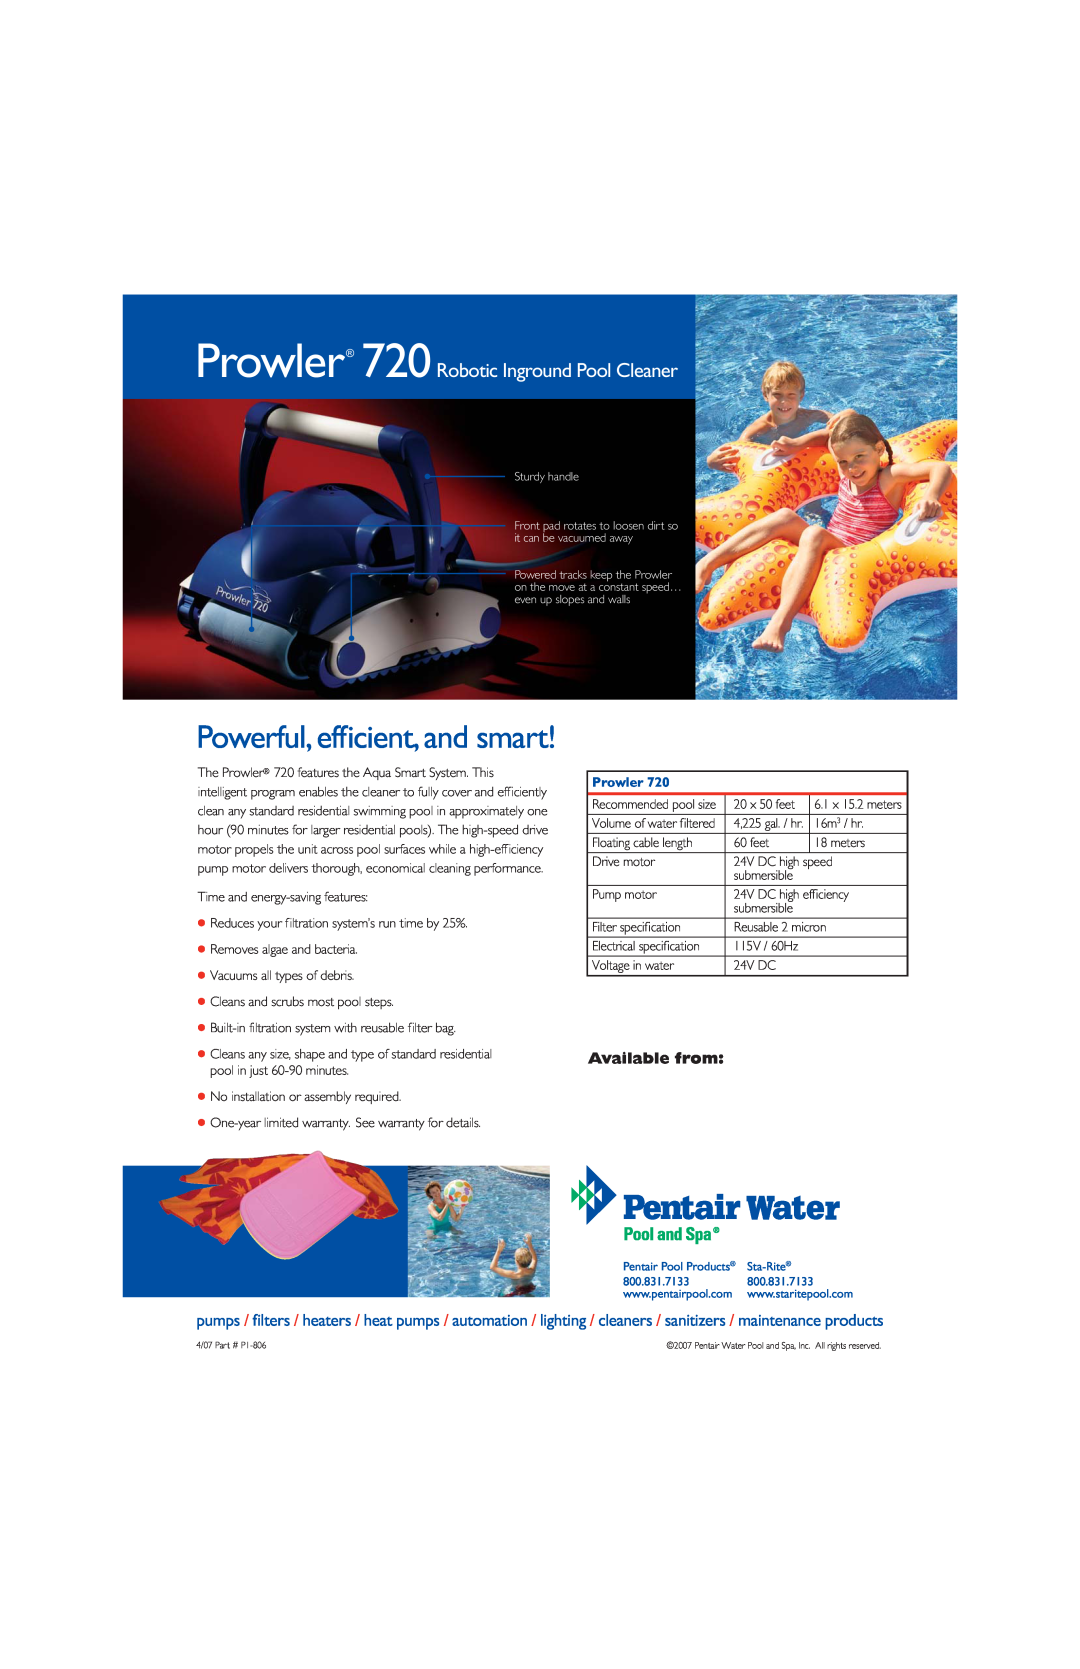 Pentair manual Powerful, efficient, and smart, Prowler 720Robotic Inground Pool Cleaner, Available from 